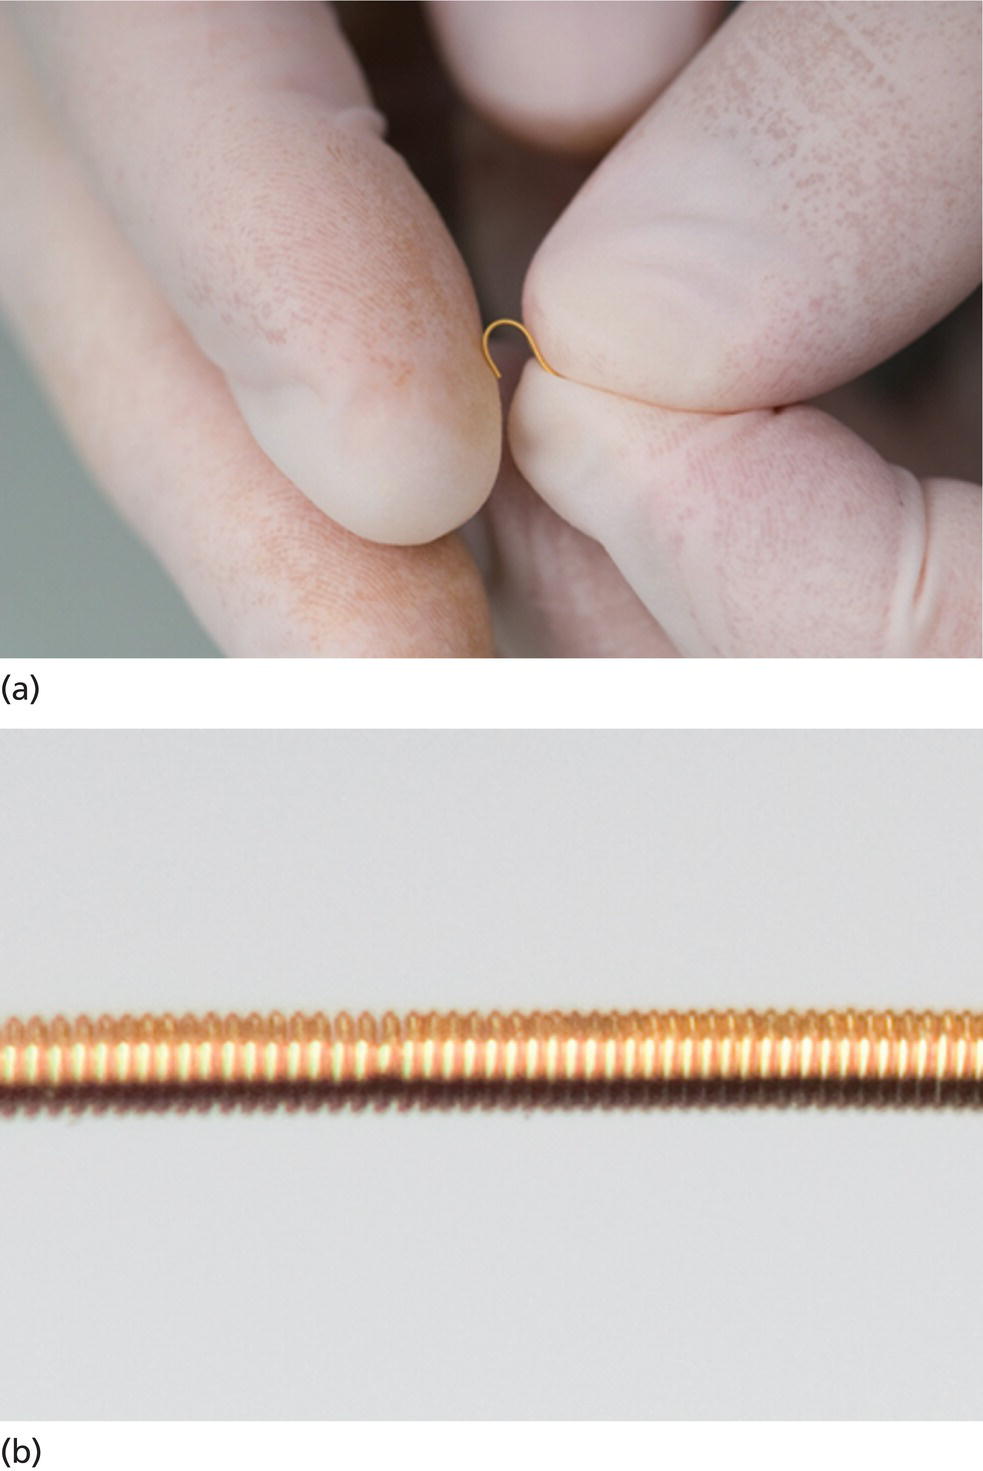 Photo depicts gold coil fiducial marker is (a) flexible and (b) has a coiled design.